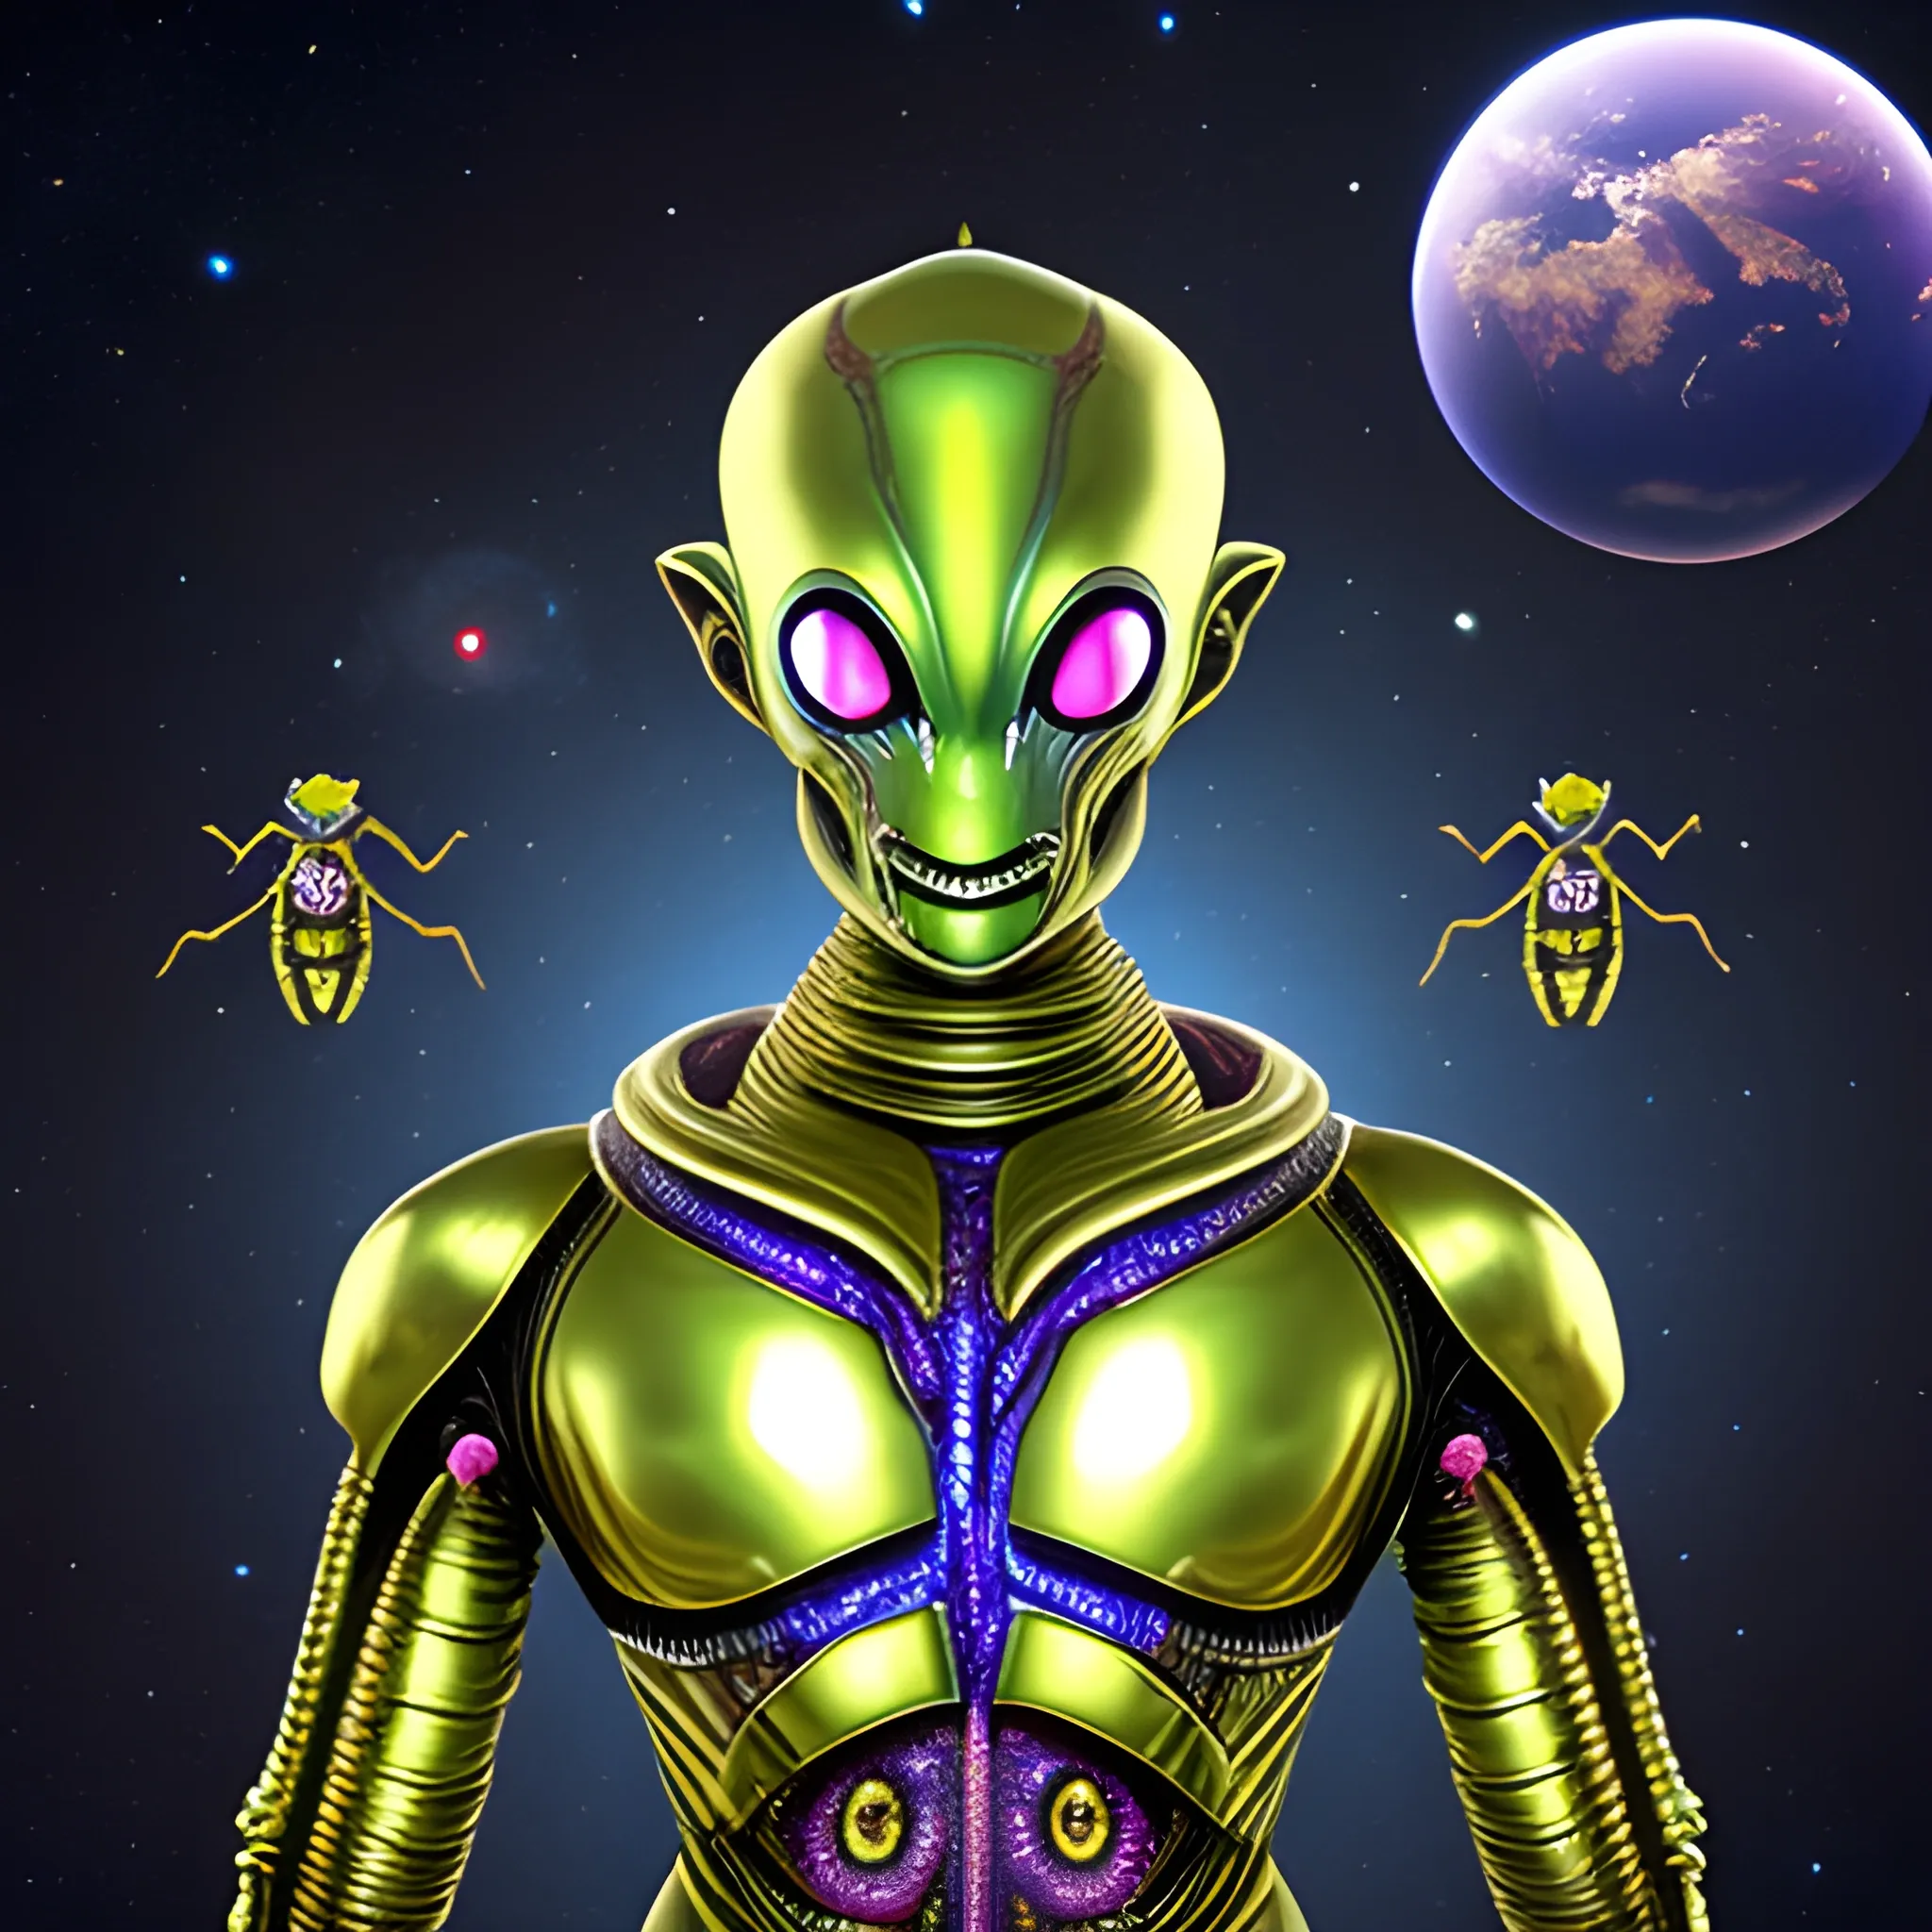  a antwearing a costume, alien cyborg   metallic hindu male godbody, in a  alien word with  space war  and your friends dead 
